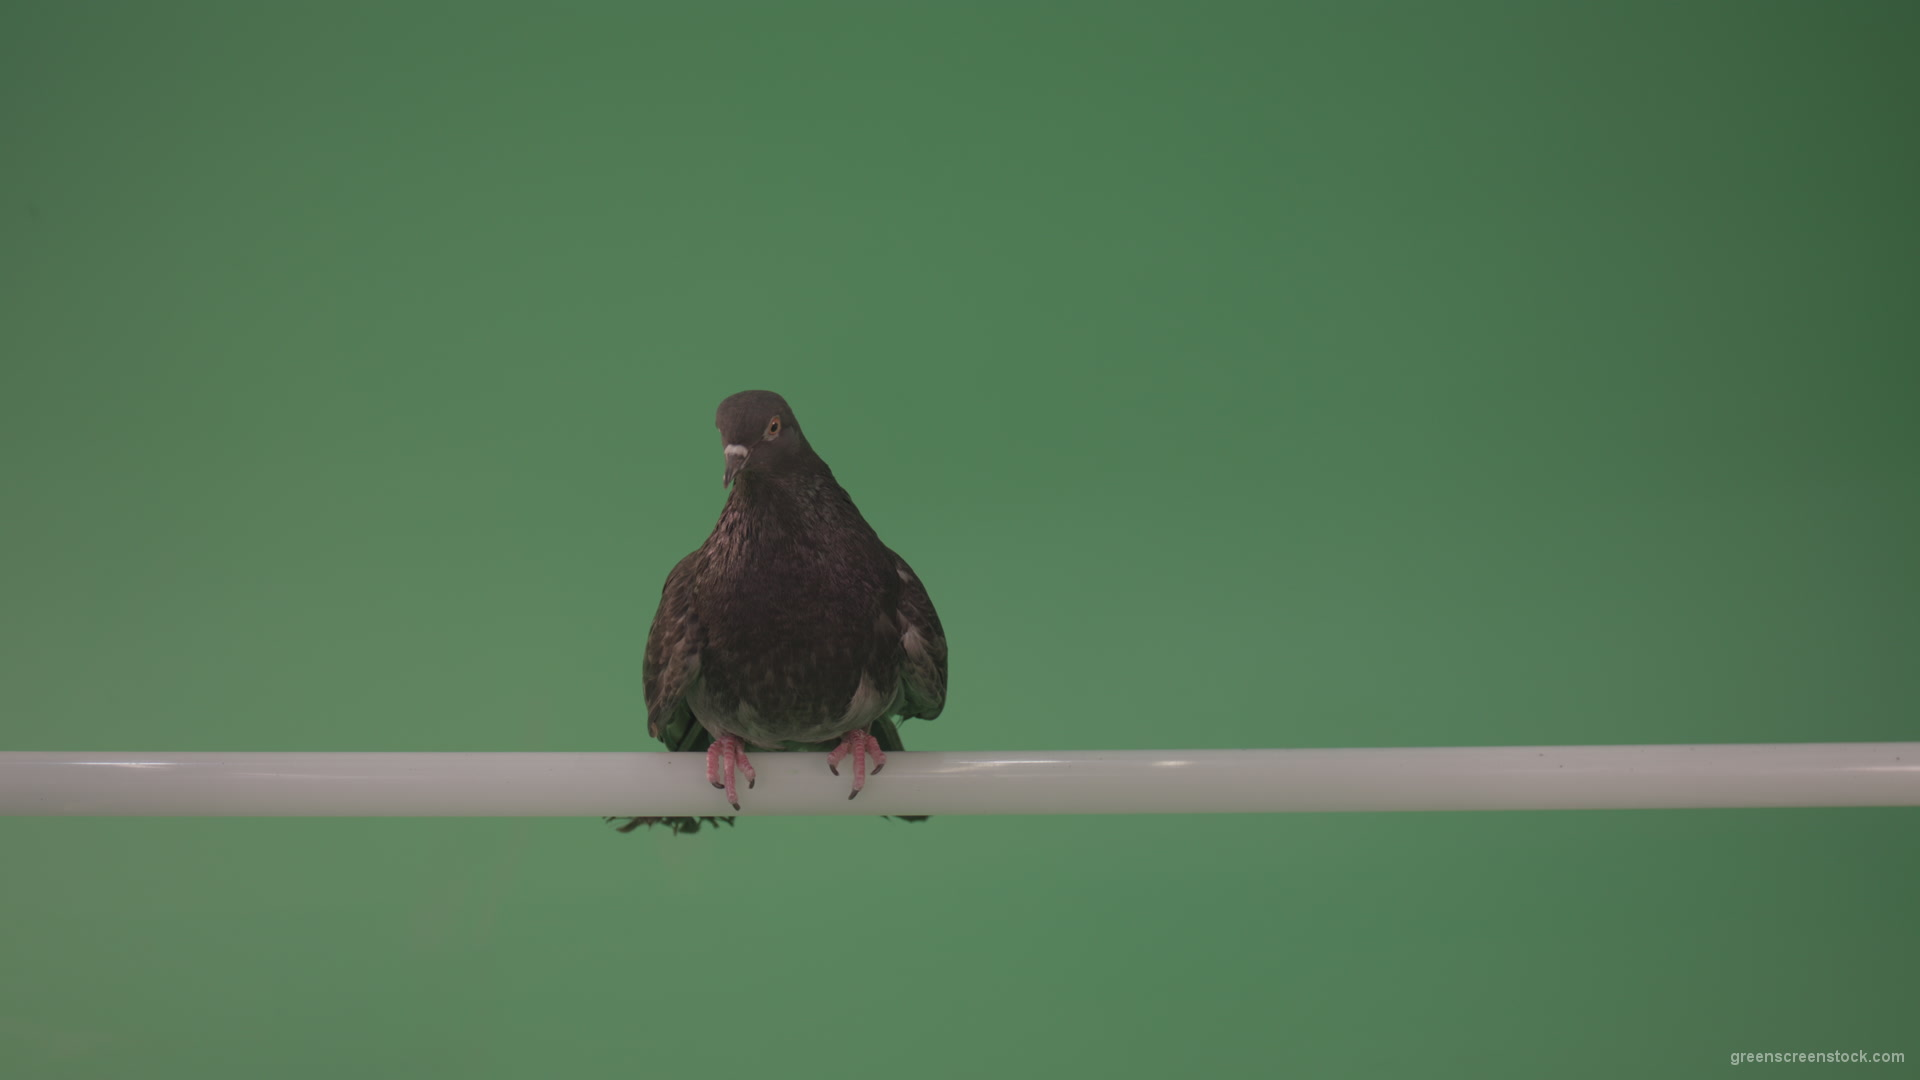 City-bird-of-a-dove-sitting-on-a-branch-in-the-city-isolated-on-green-background_002 Green Screen Stock